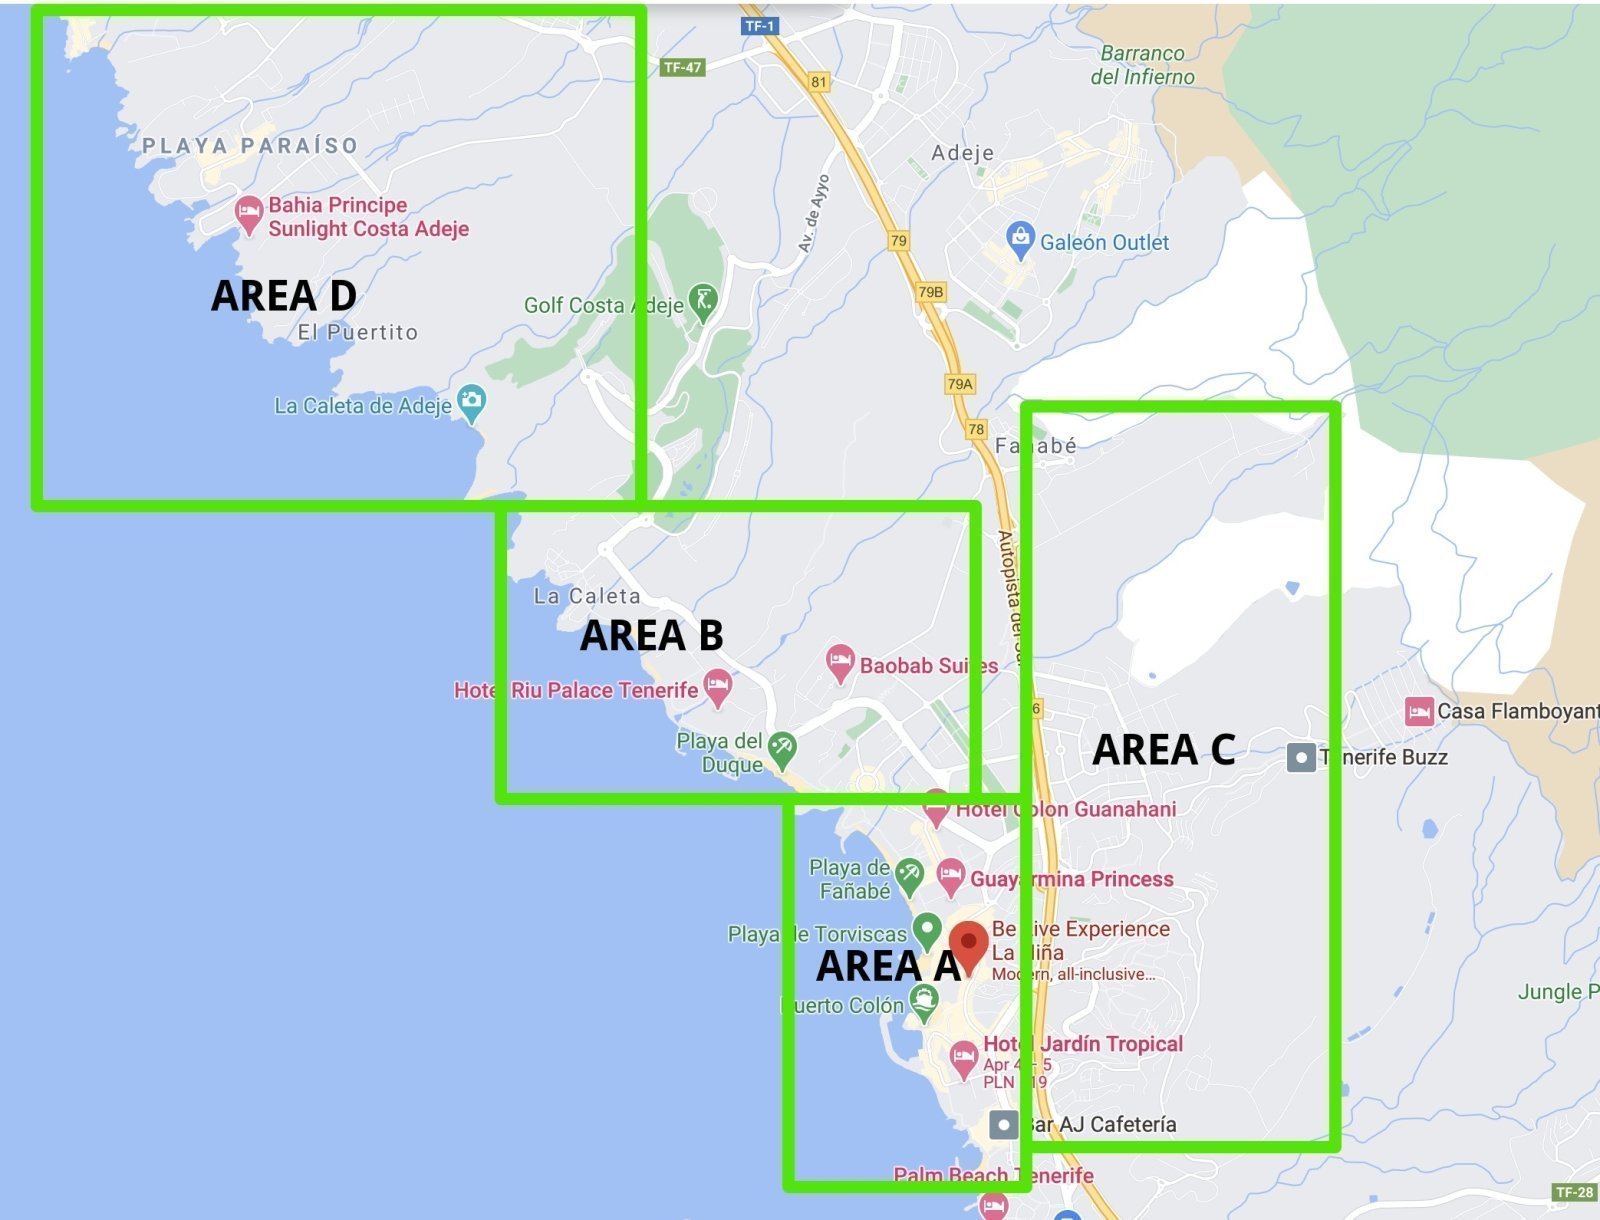 Costa Adeje hotels are located in completely different zones - choose a hotel in the right zone for you